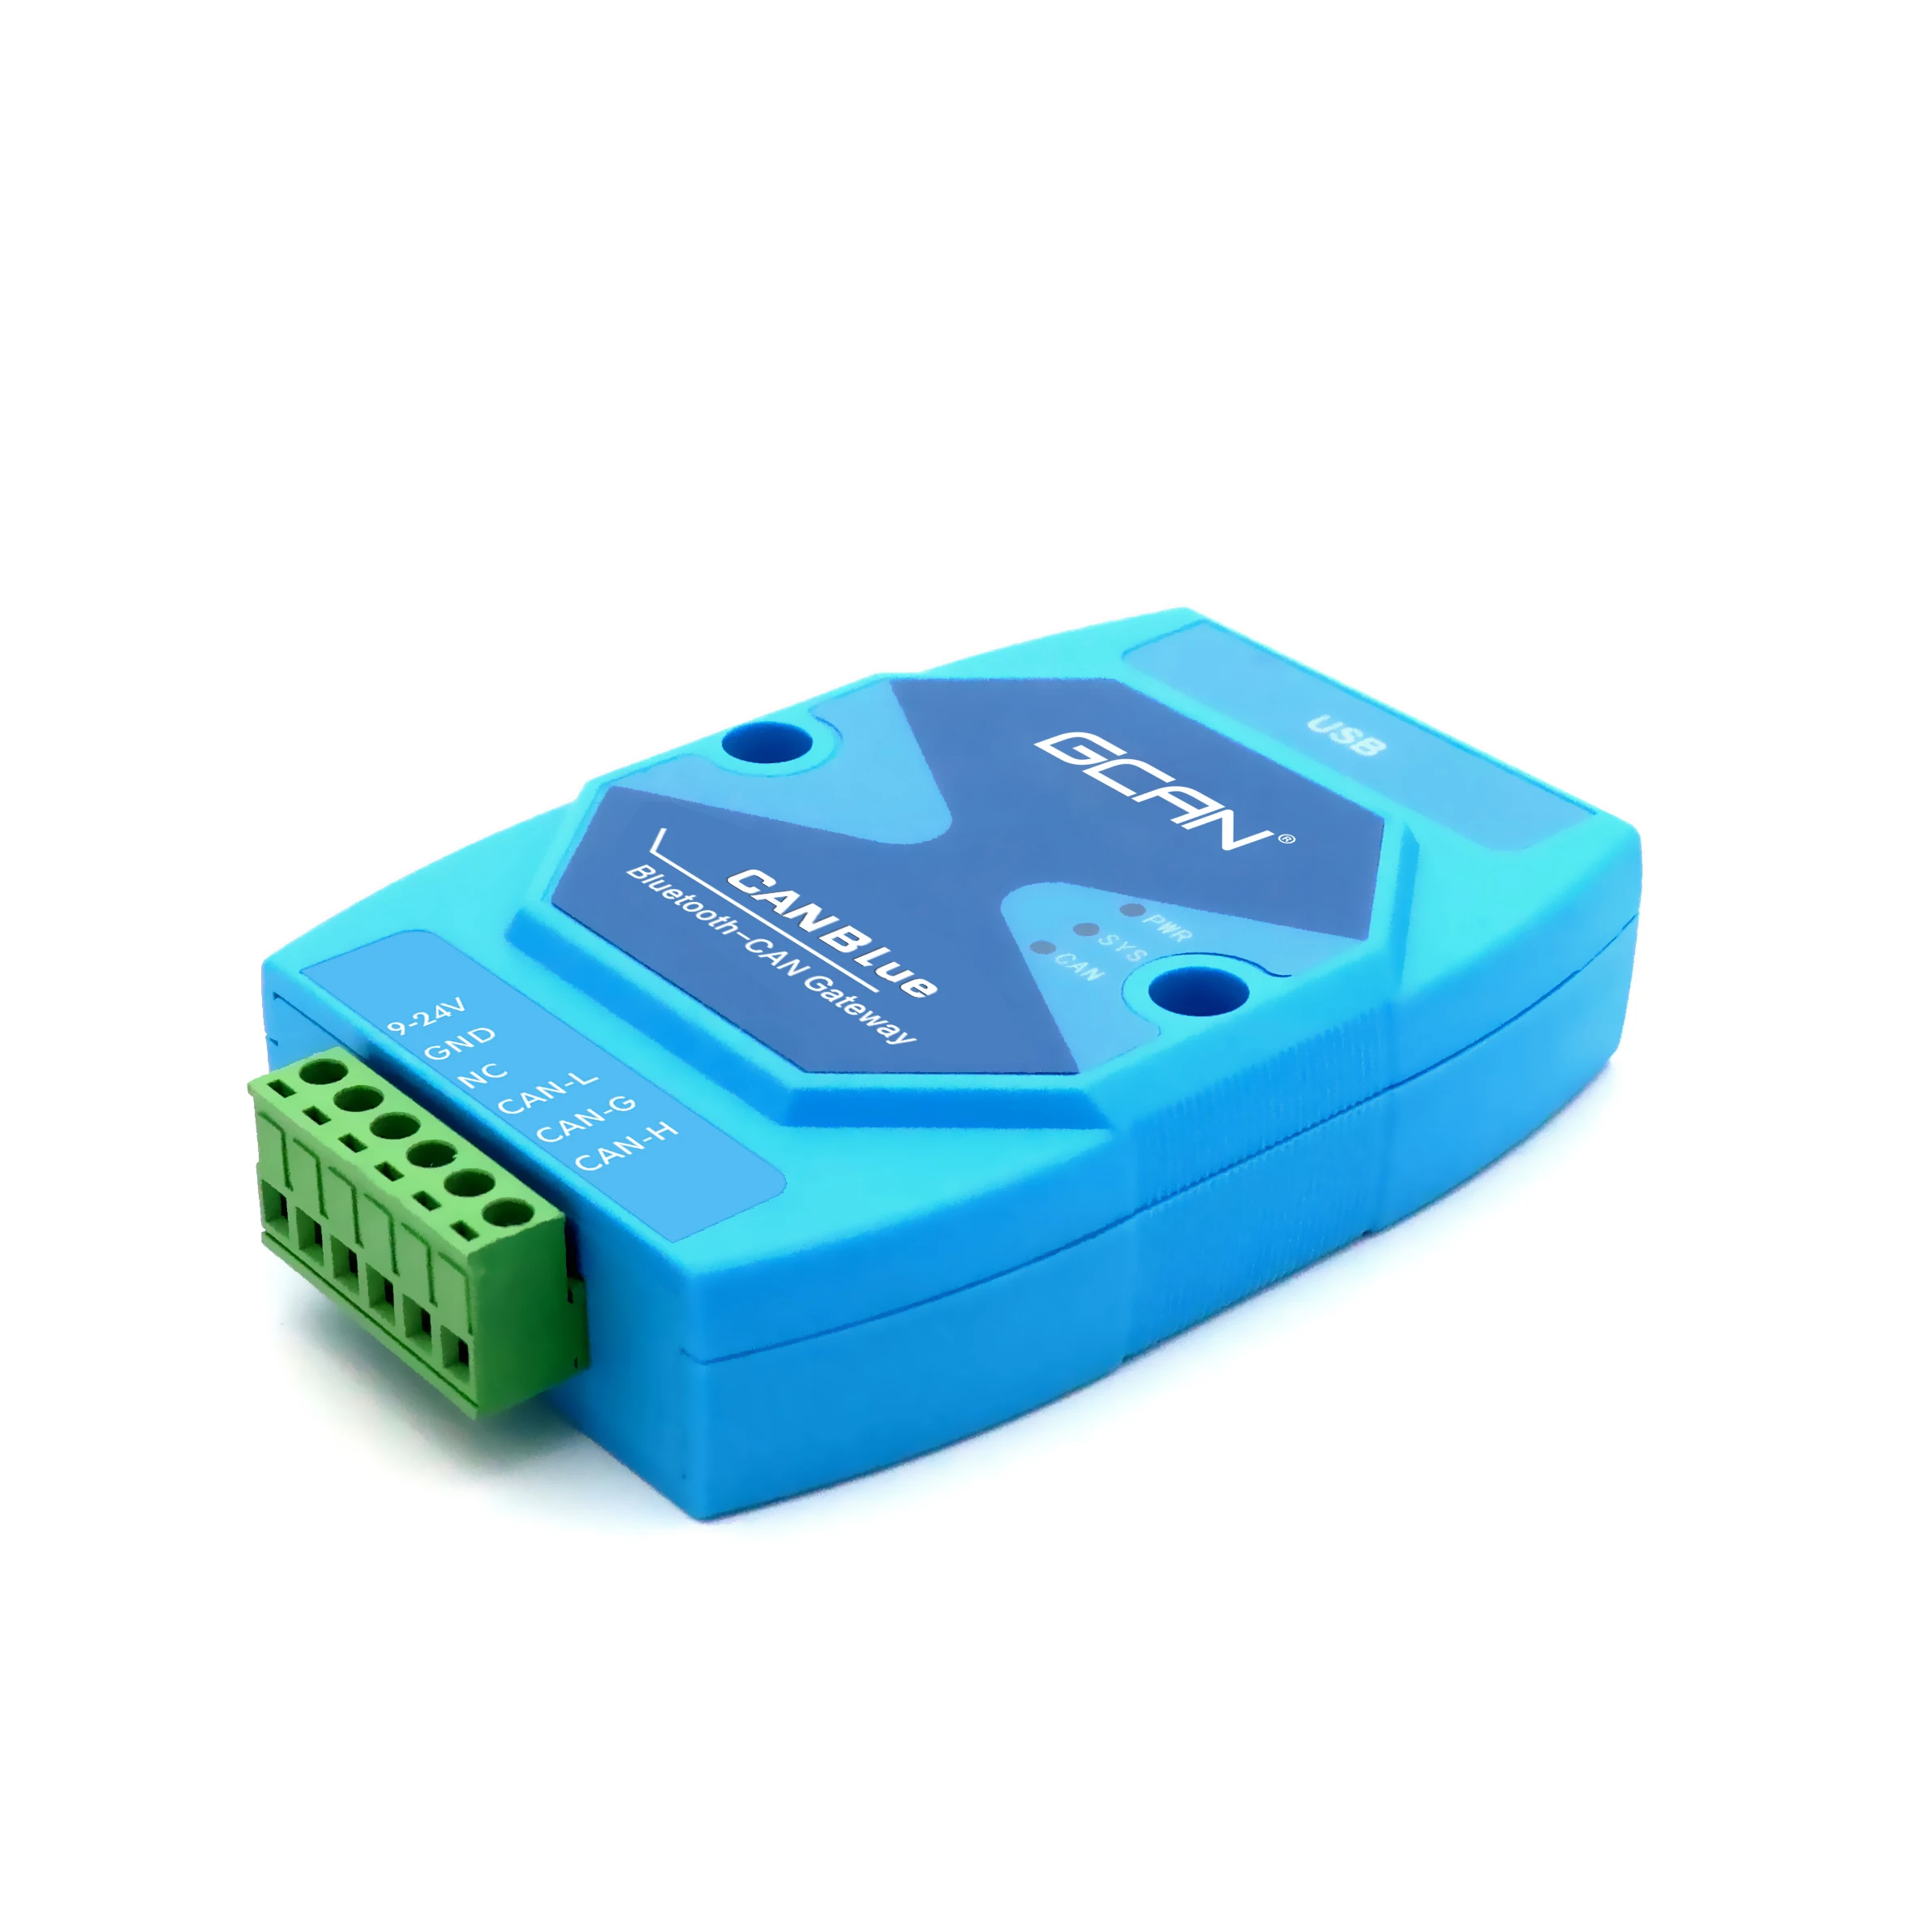 Canbus Gateway Bluetooth 2.0/5.0 To Can Converter Can Build Bidirectional Communication Between Mobile Device And Can Bus